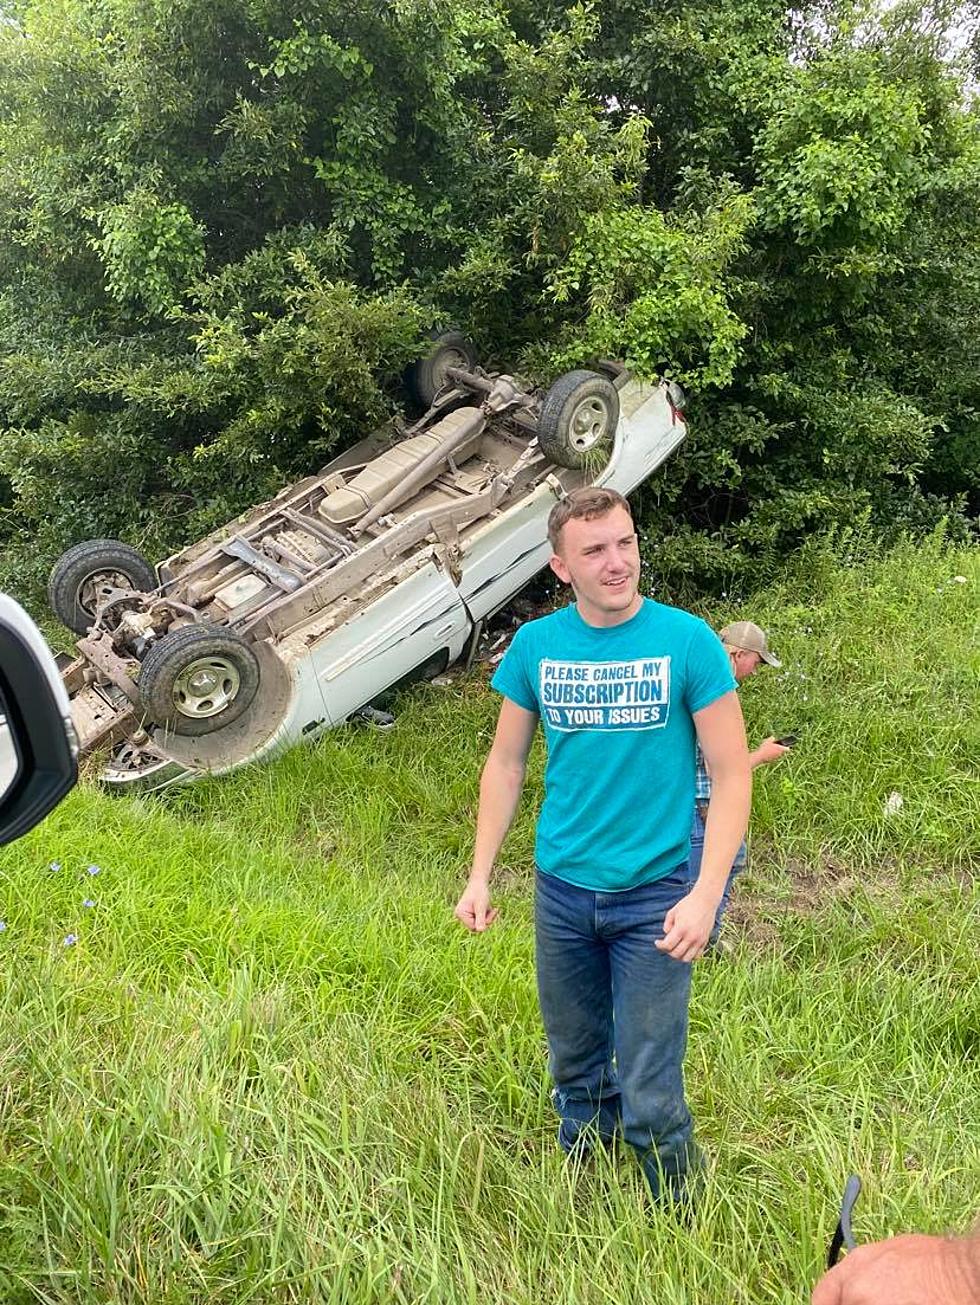 Two Windsor Teens Injured in Henry County Rollover